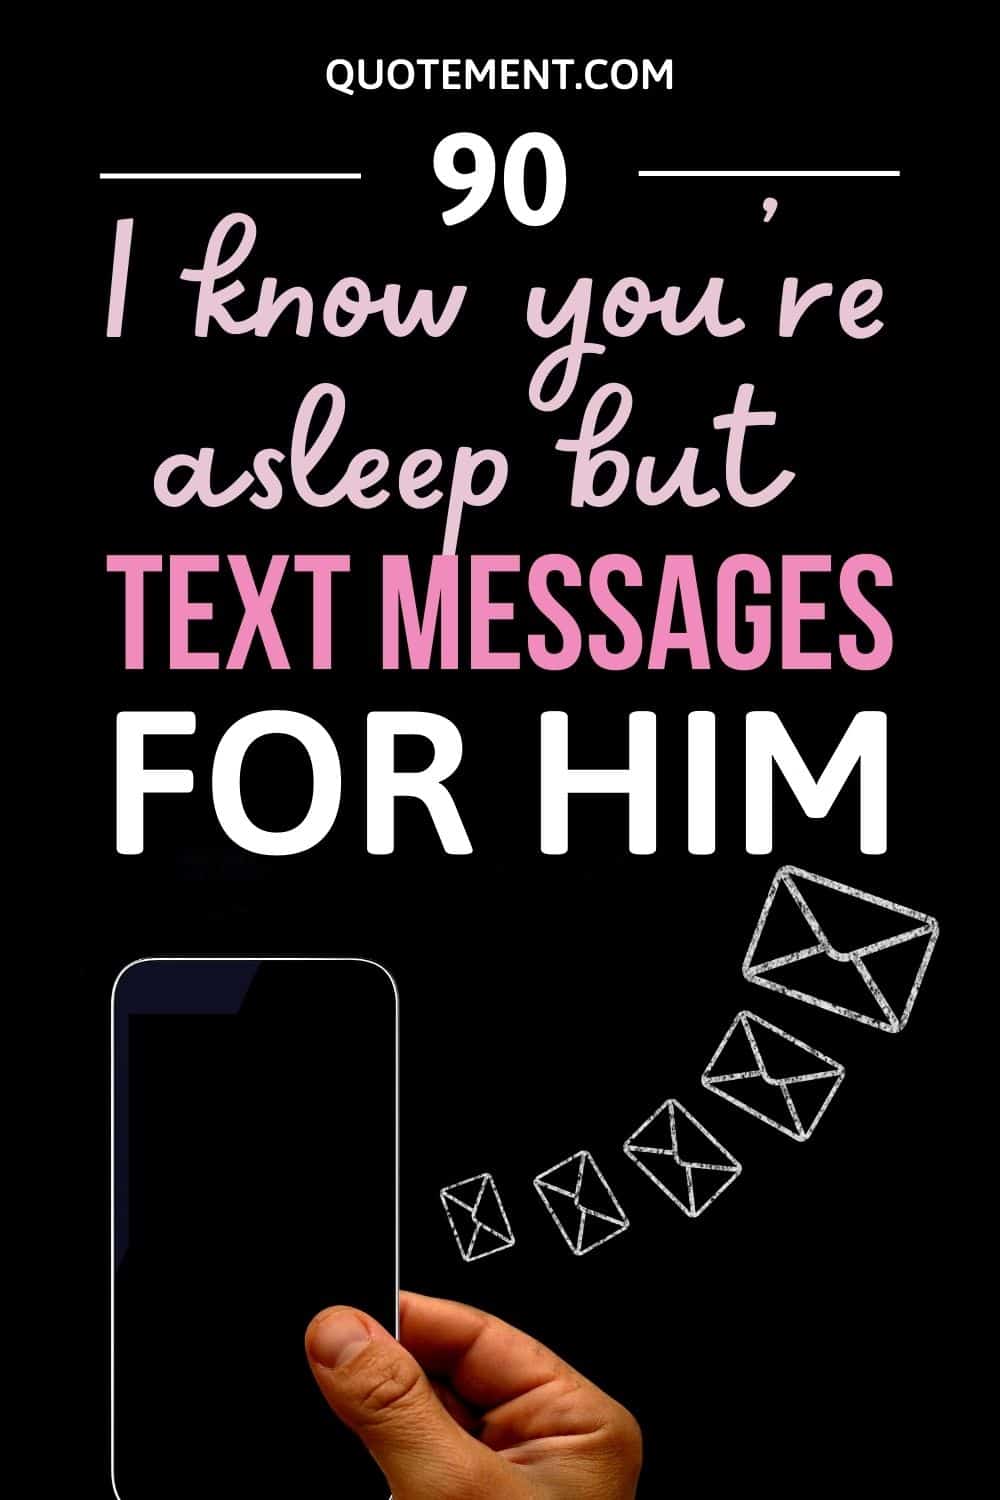 90 Sweet I Know You’re Asleep But Text Messages For Him